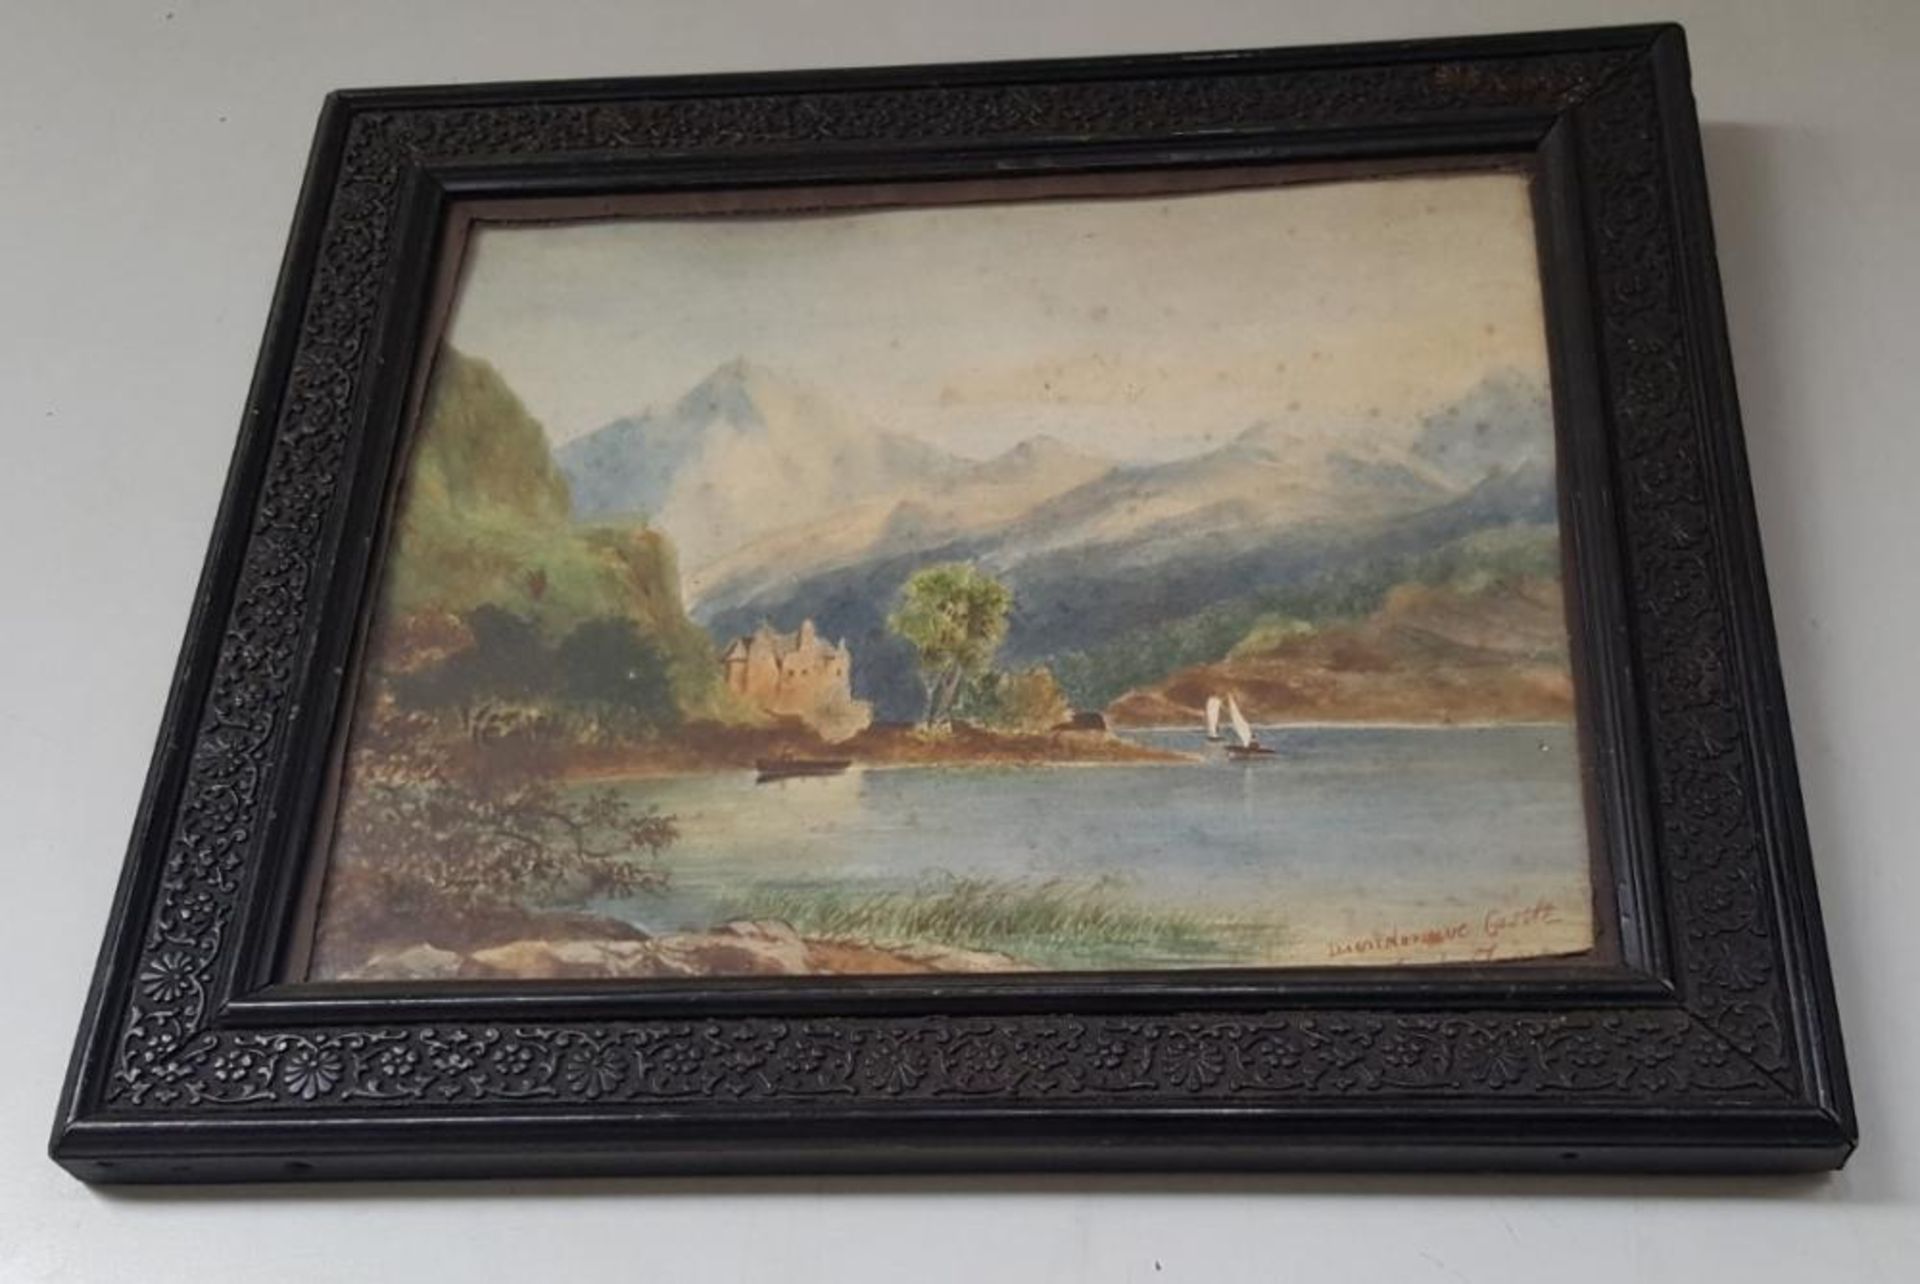 1 x Dunderave Castle Loch Fyne Painting In A Wooden Frame - Ref RB287 E - Dimensions: H30/L10cm - CL - Image 3 of 4